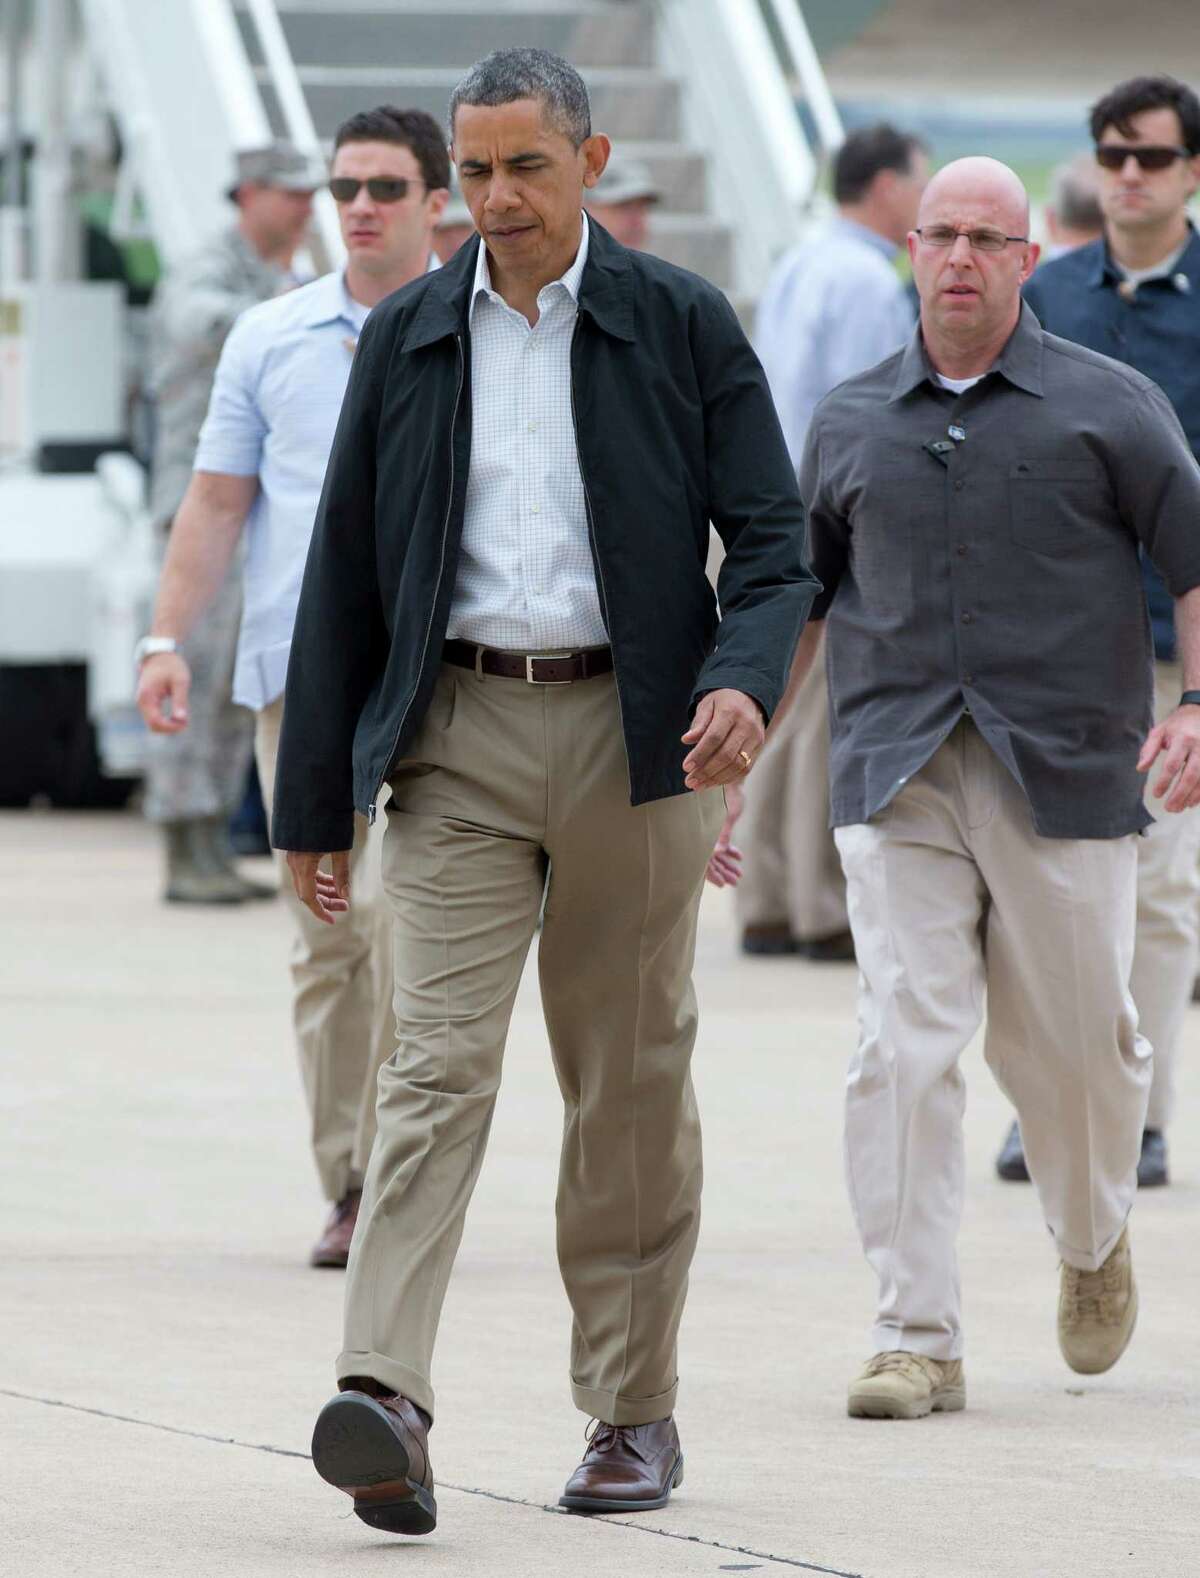 President Barack Obama walks across the tarmac to greet people as he arrives on Air Force One, Sunday, May 26, 2013, at Tinker Air Force Base in Midwest City, Okla., en route to the Moore, Okla., to see the response to the severe tornadoes and weather that devastated the area. He will also visit with the families affected, and with first responders. (AP Photo/Carolyn Kaster)